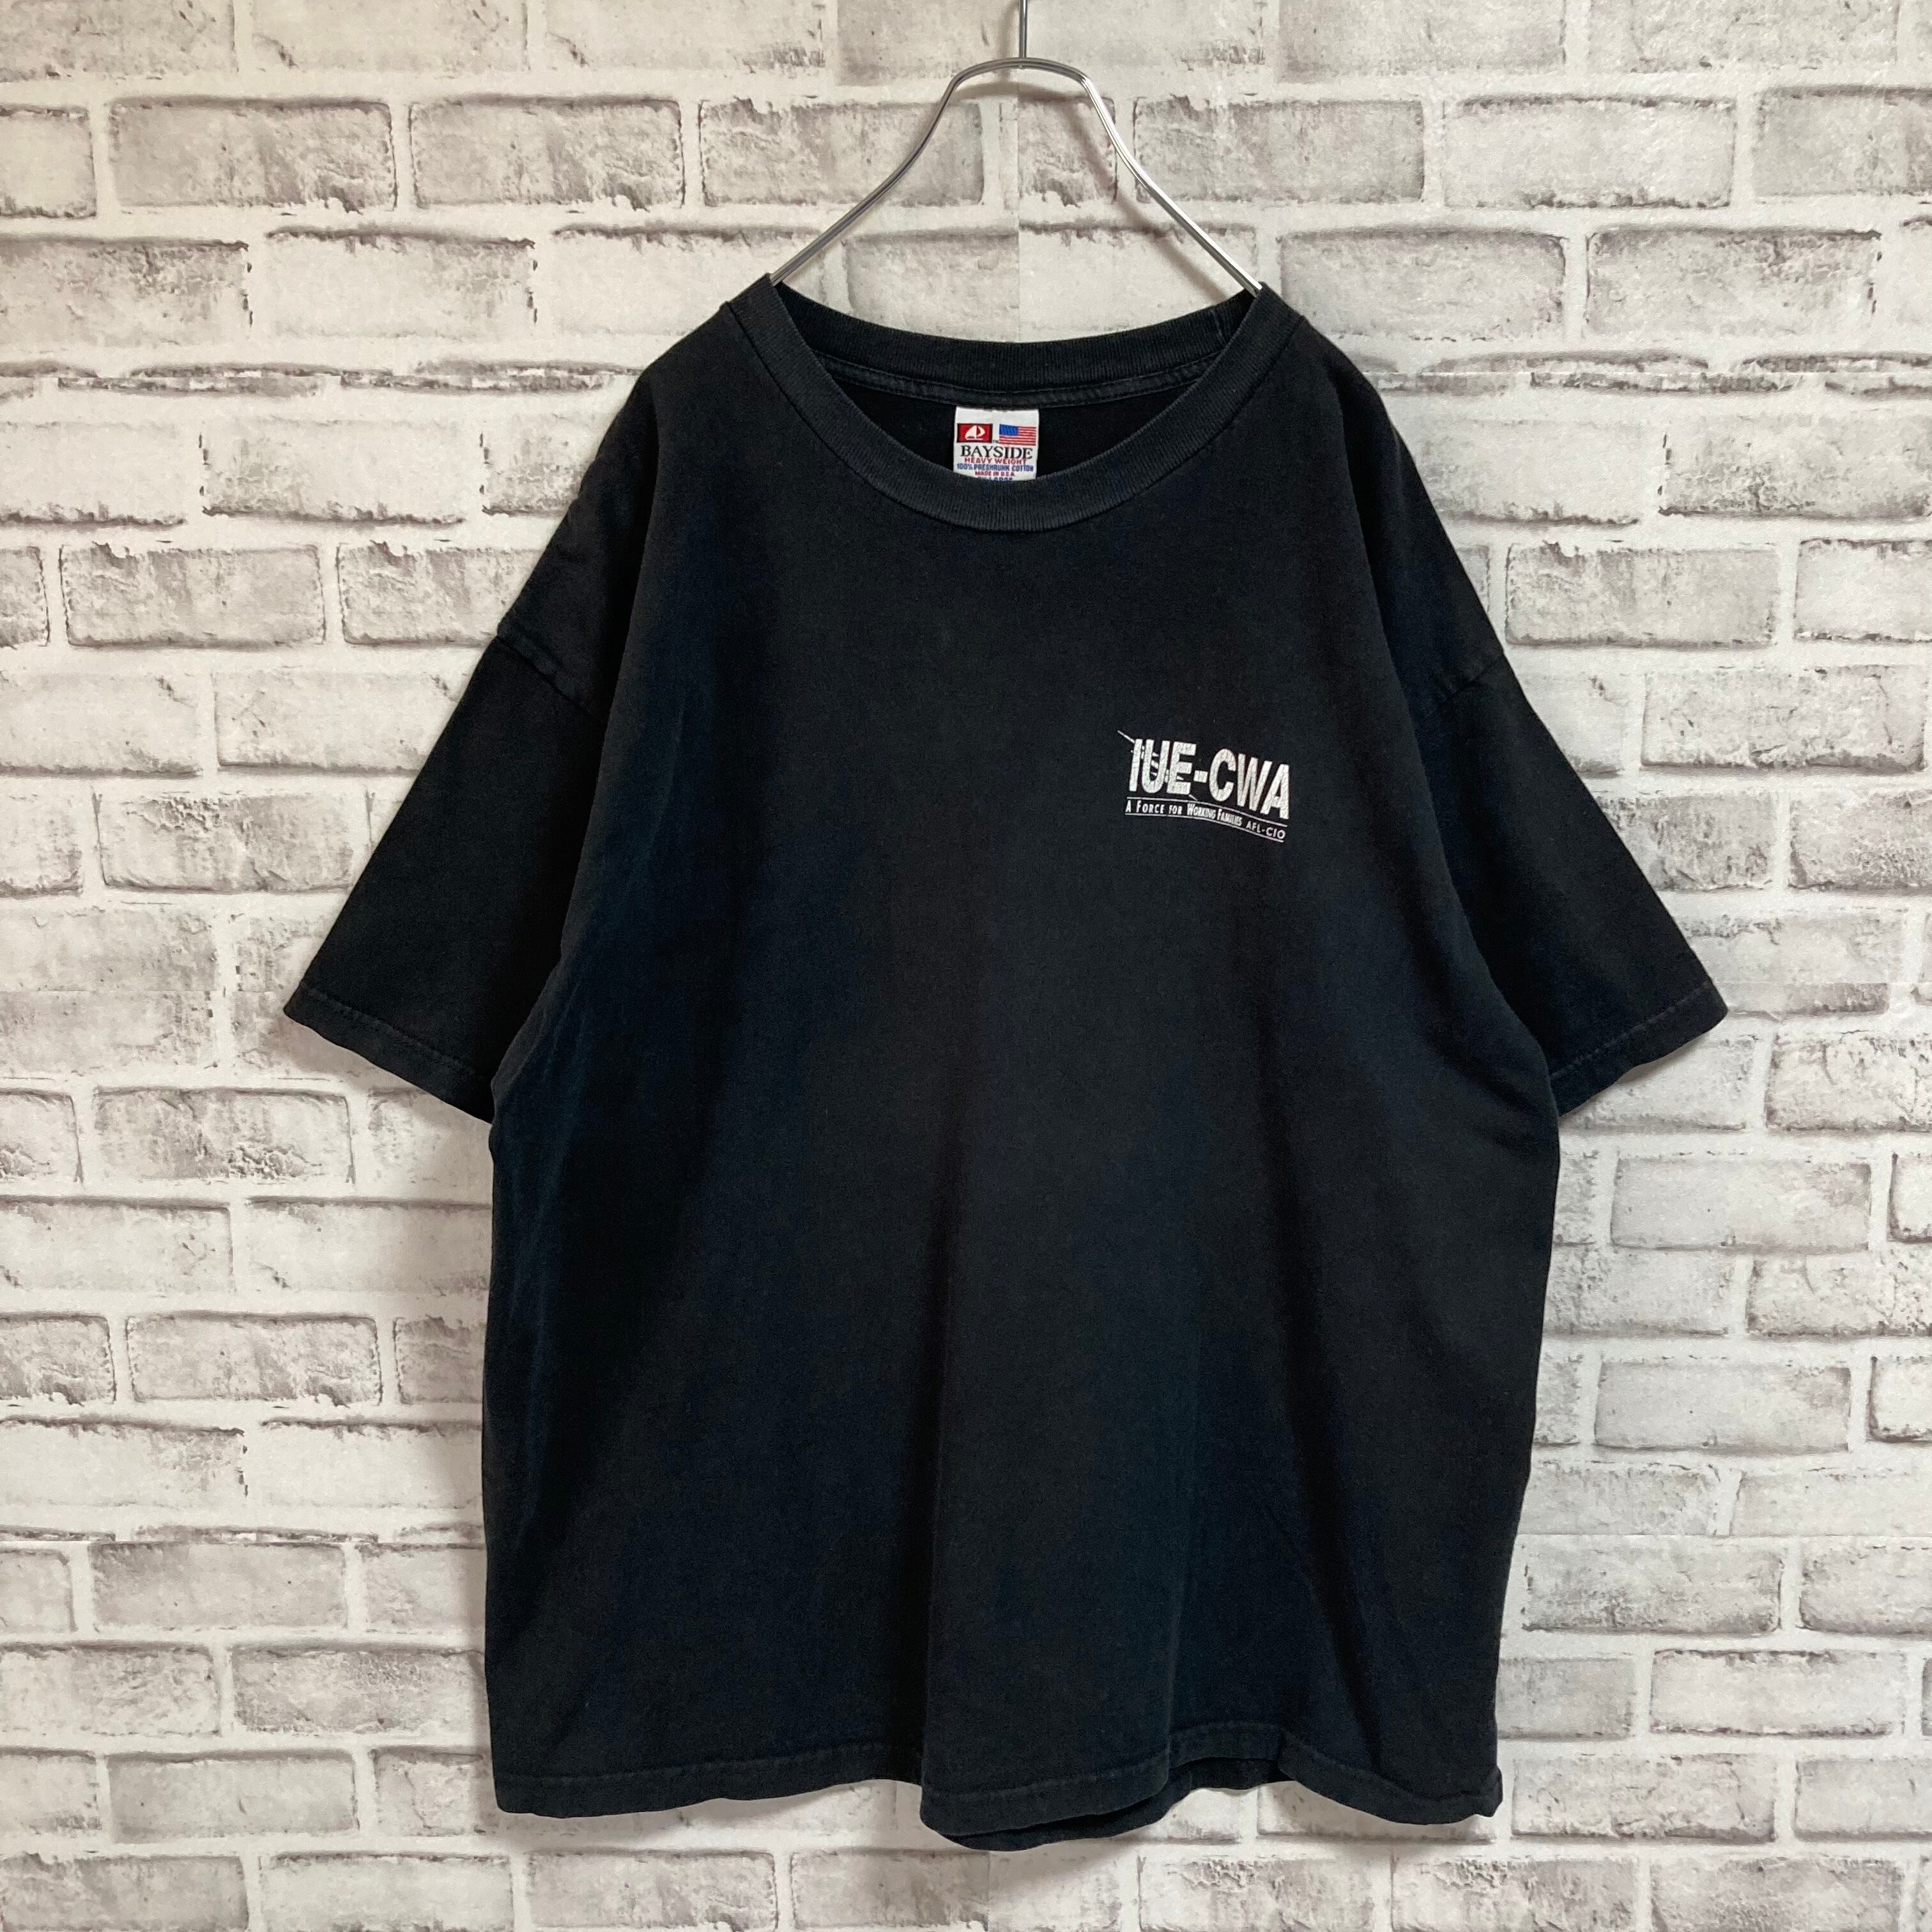 【Bayside】S/S Tee 2XL Made in USA ベイサイド USA製 バックプリント Tシャツ 企業モノ 胸ロゴ 両面プリント  星条旗 イーグル アニマル アメリカ USA 古着